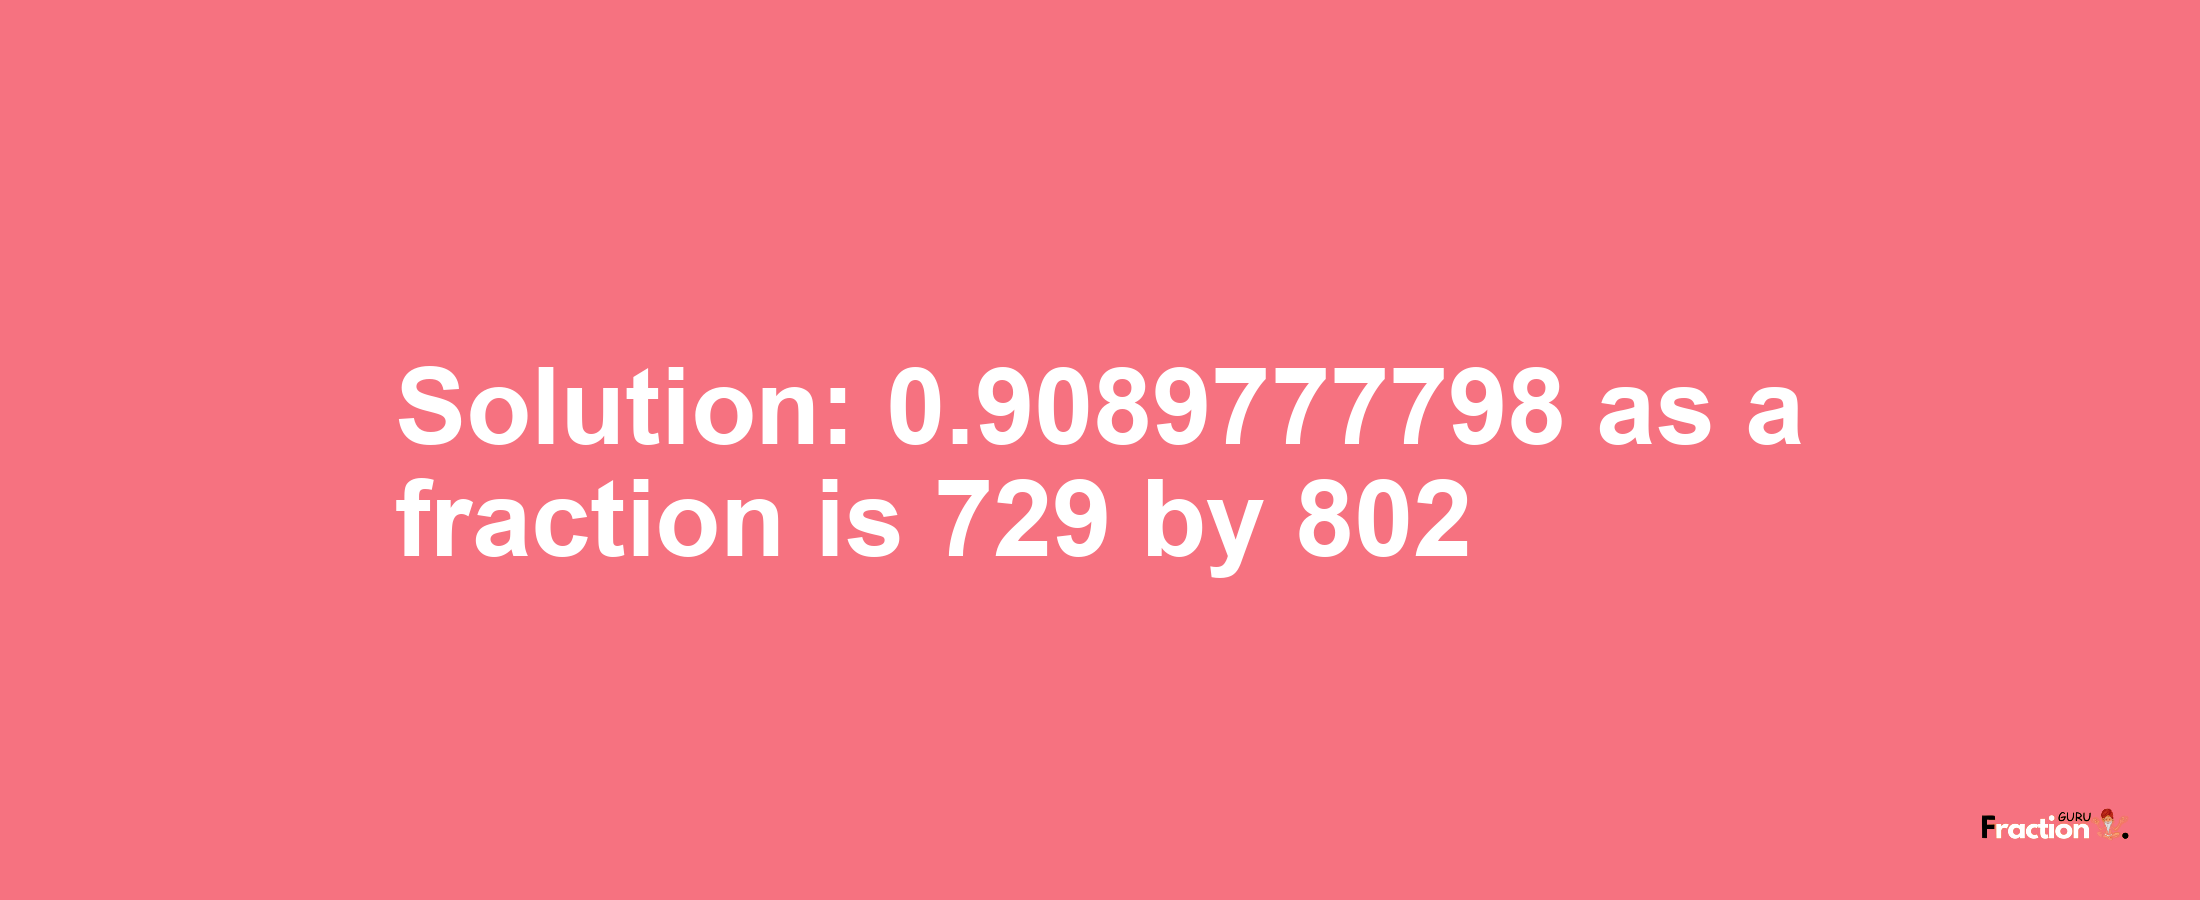 Solution:0.9089777798 as a fraction is 729/802